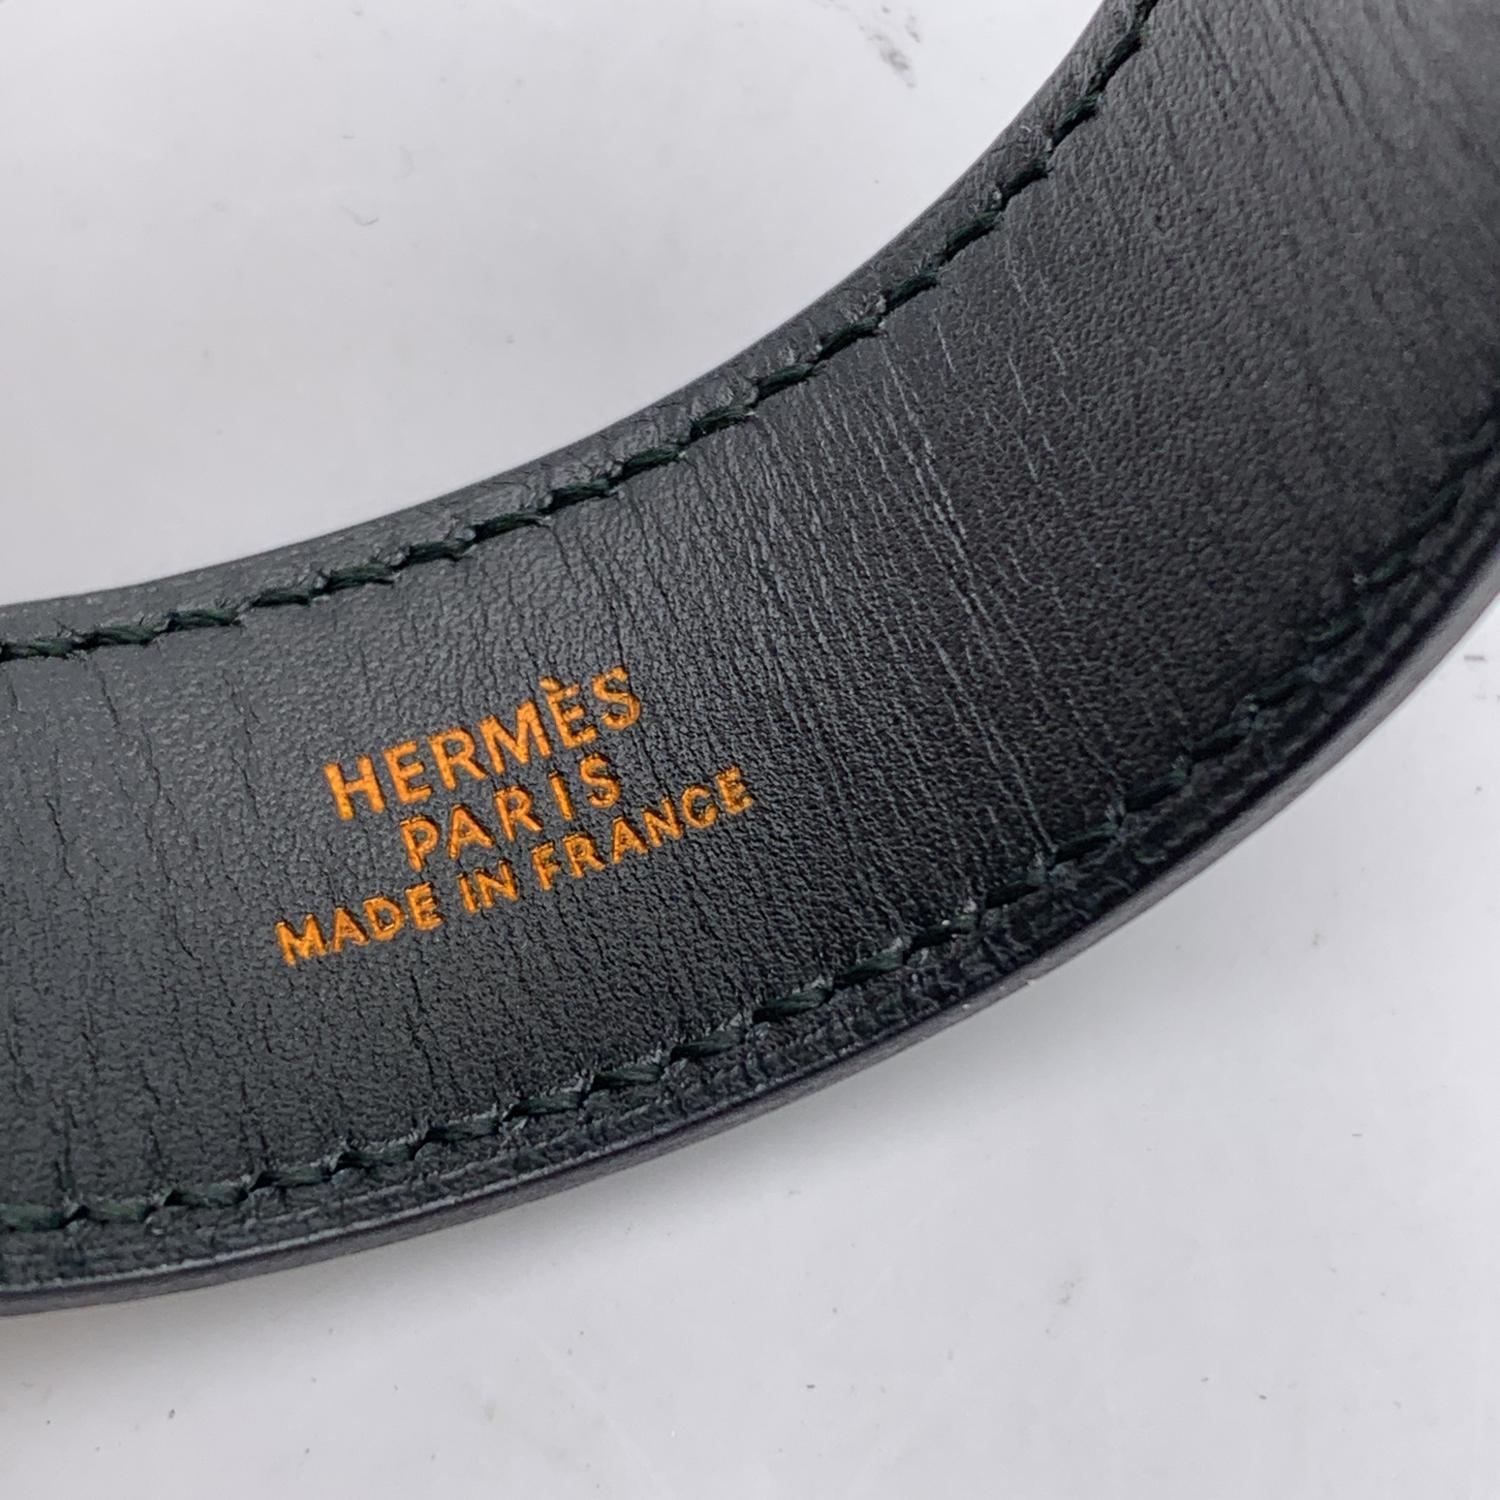 Vintage Hermes leather bracelet in black color. Gold buckle. For wrists up to 6 inches - 15cm in circumference. Signed 'Hermes' hardware. 'Hermes Paris - made in France' embossed inside the bracelet. Blind stamp is a B encased in a Square (year of